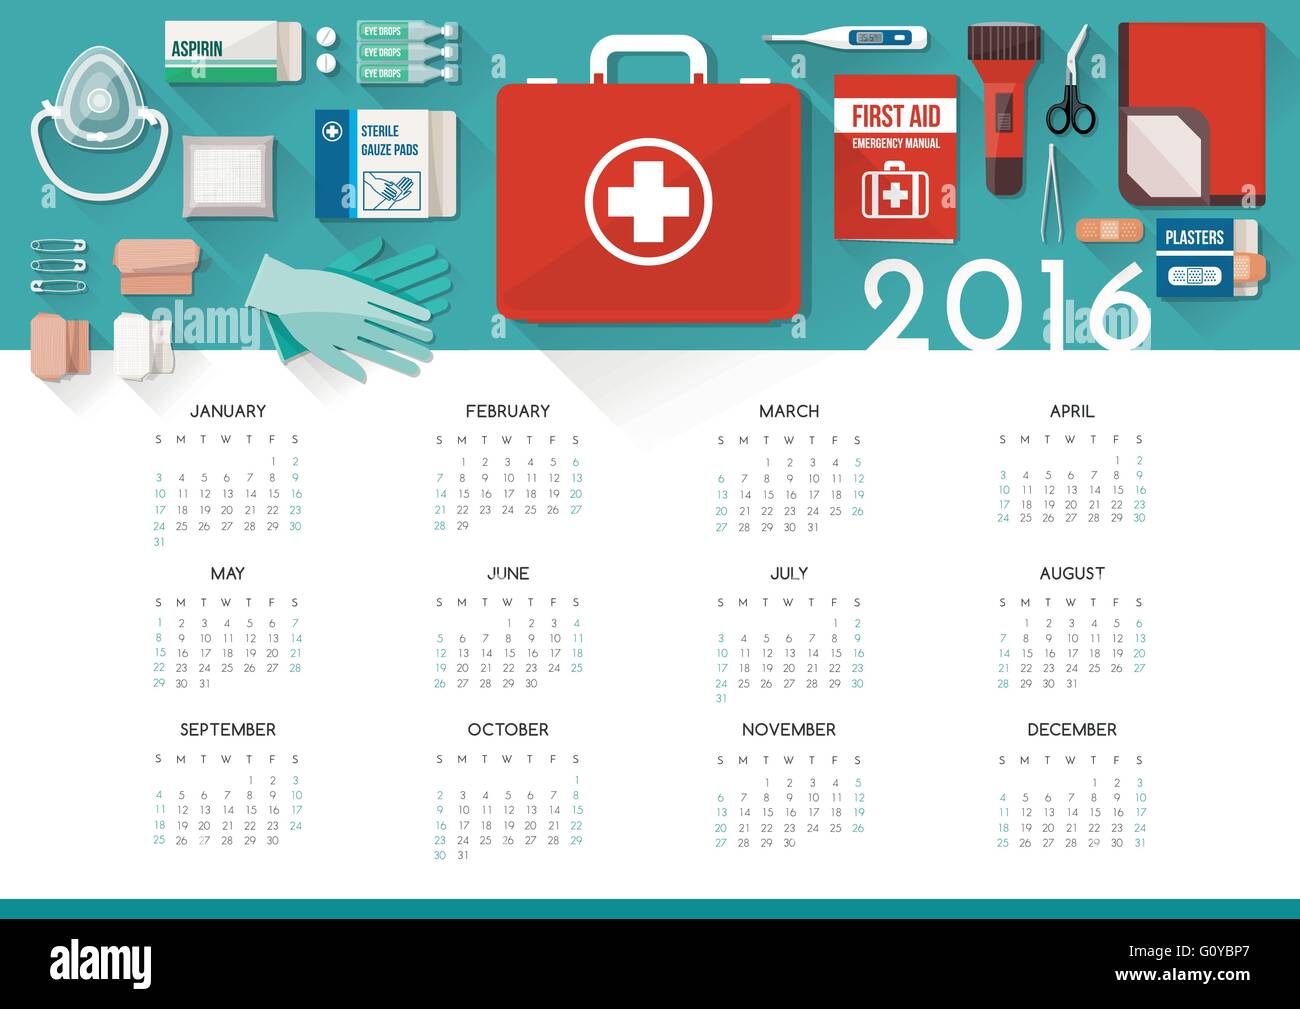 First aid kit calendar 2016 with medical supplies for emergencies, healthcare concept Stock Vector